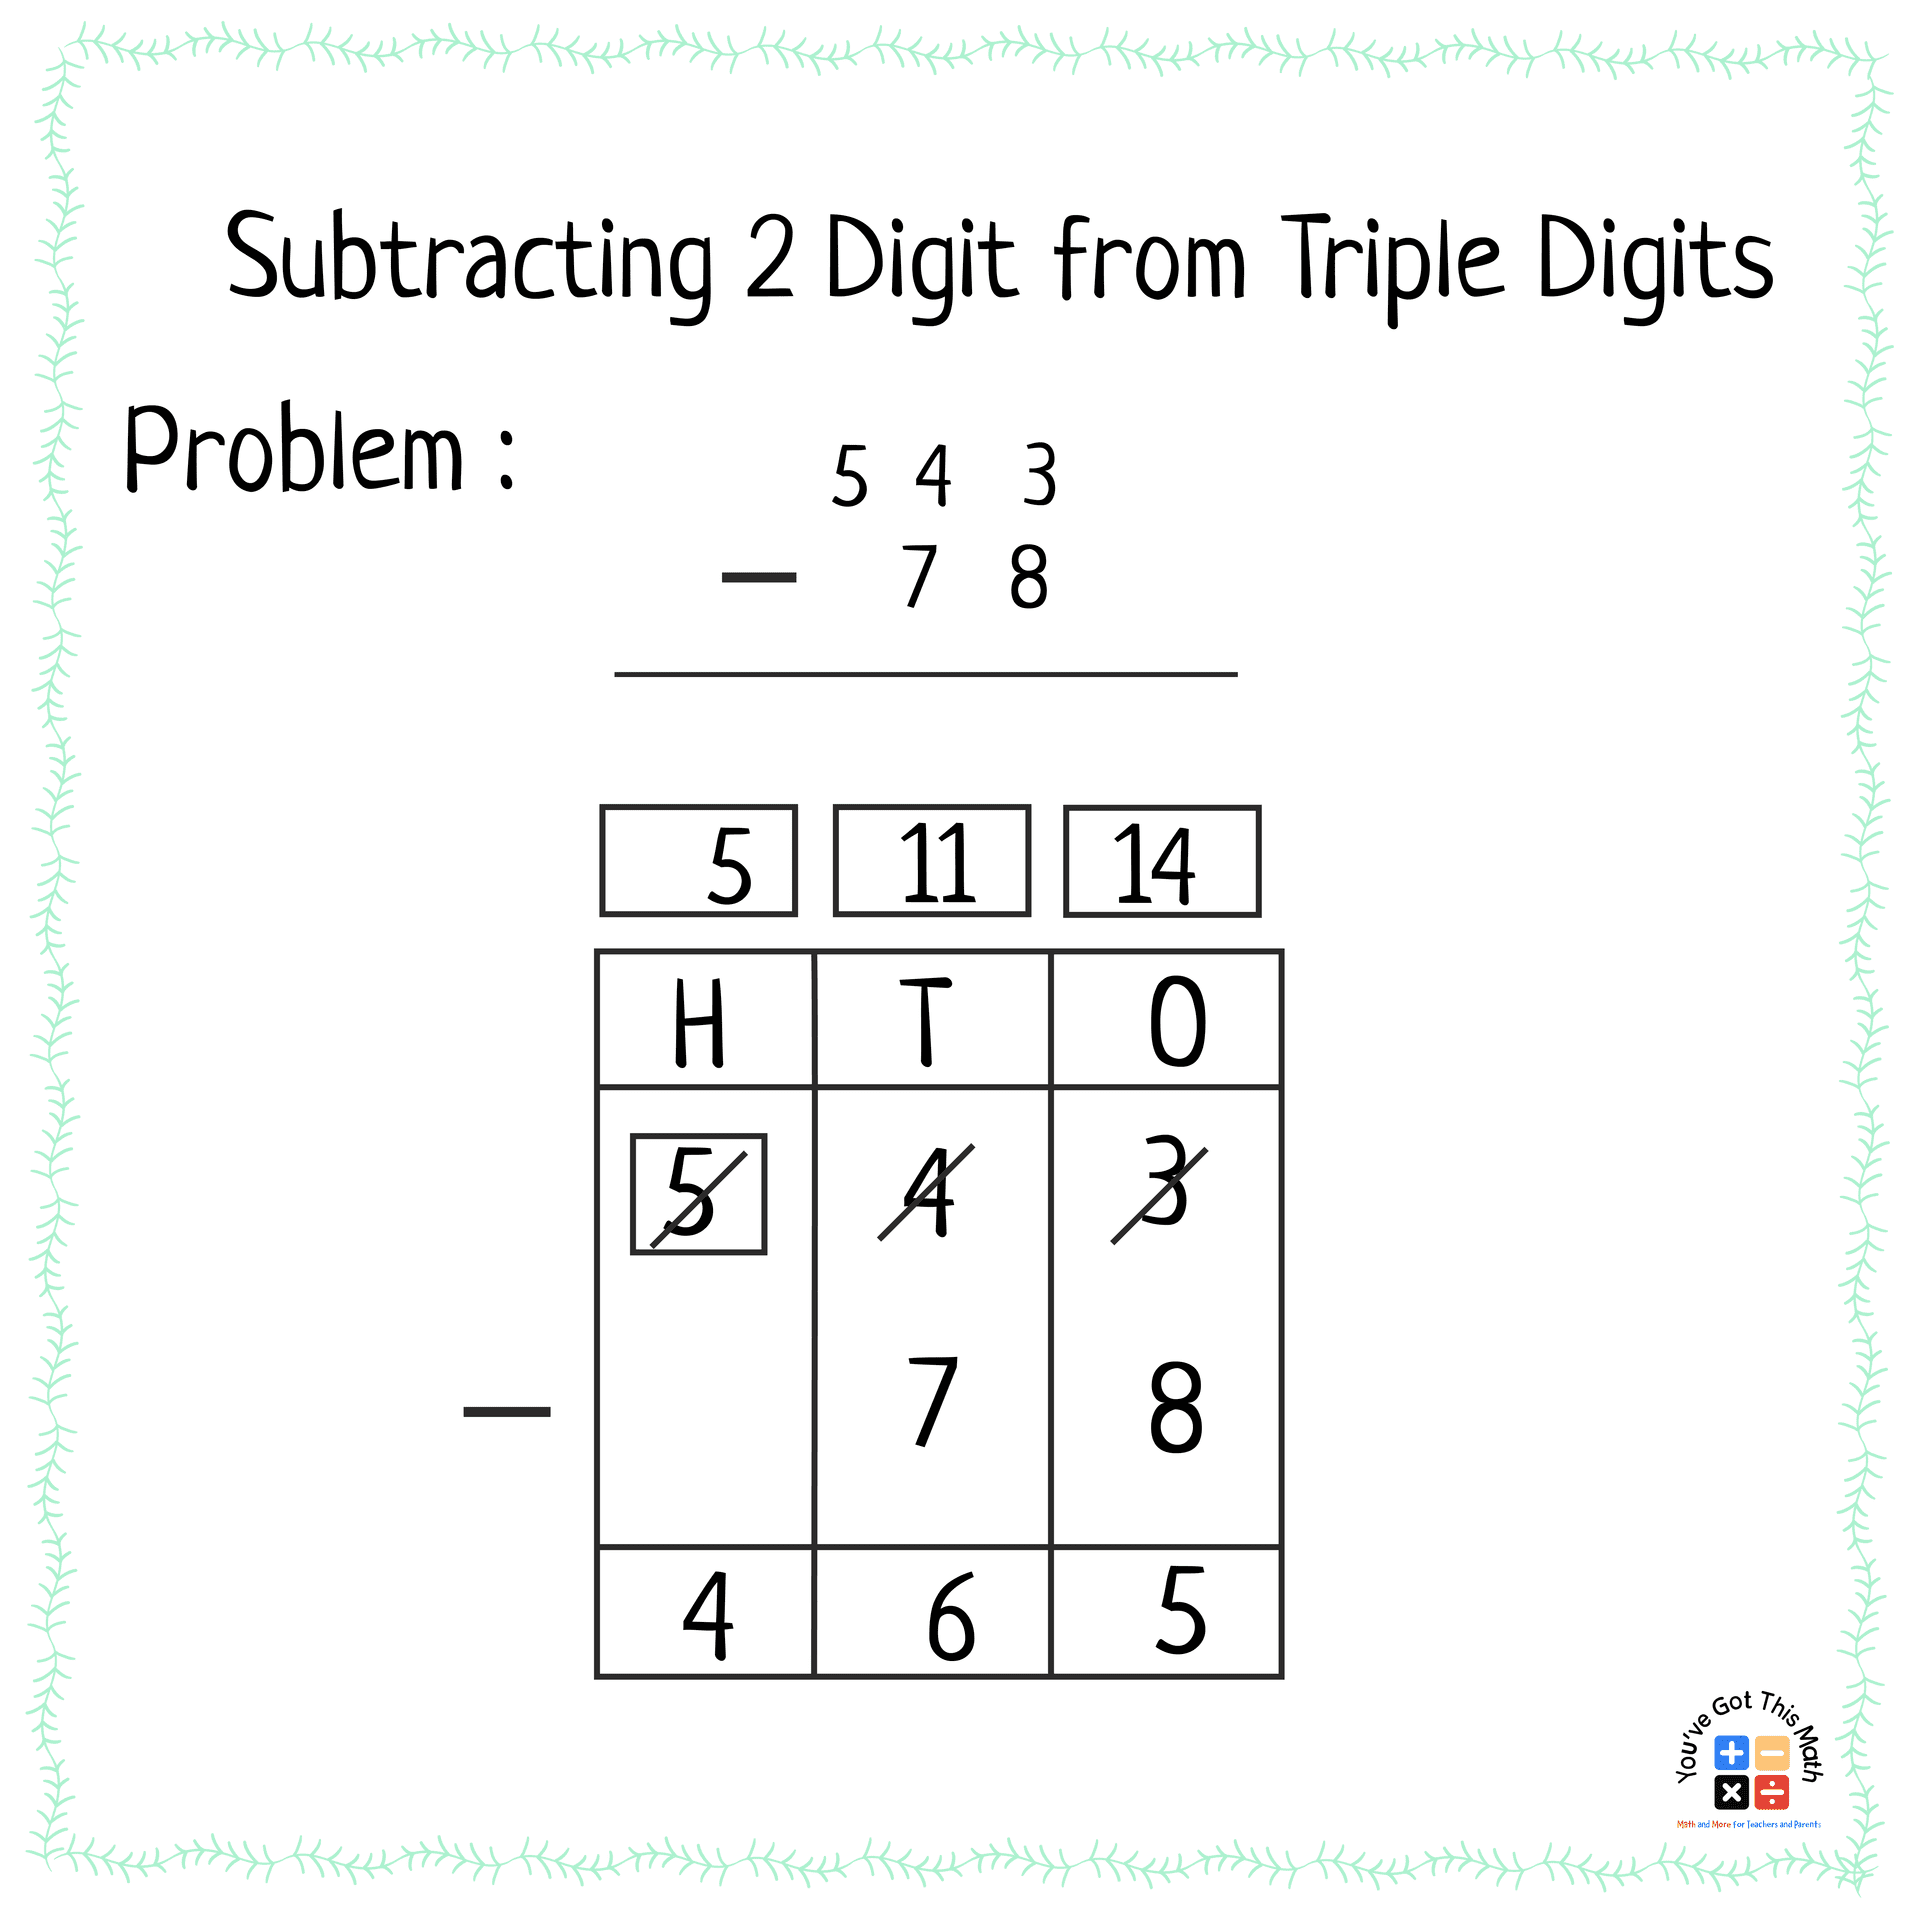 subtraction of 2 digits from triple digits in triple digit subtraction with regrouping 